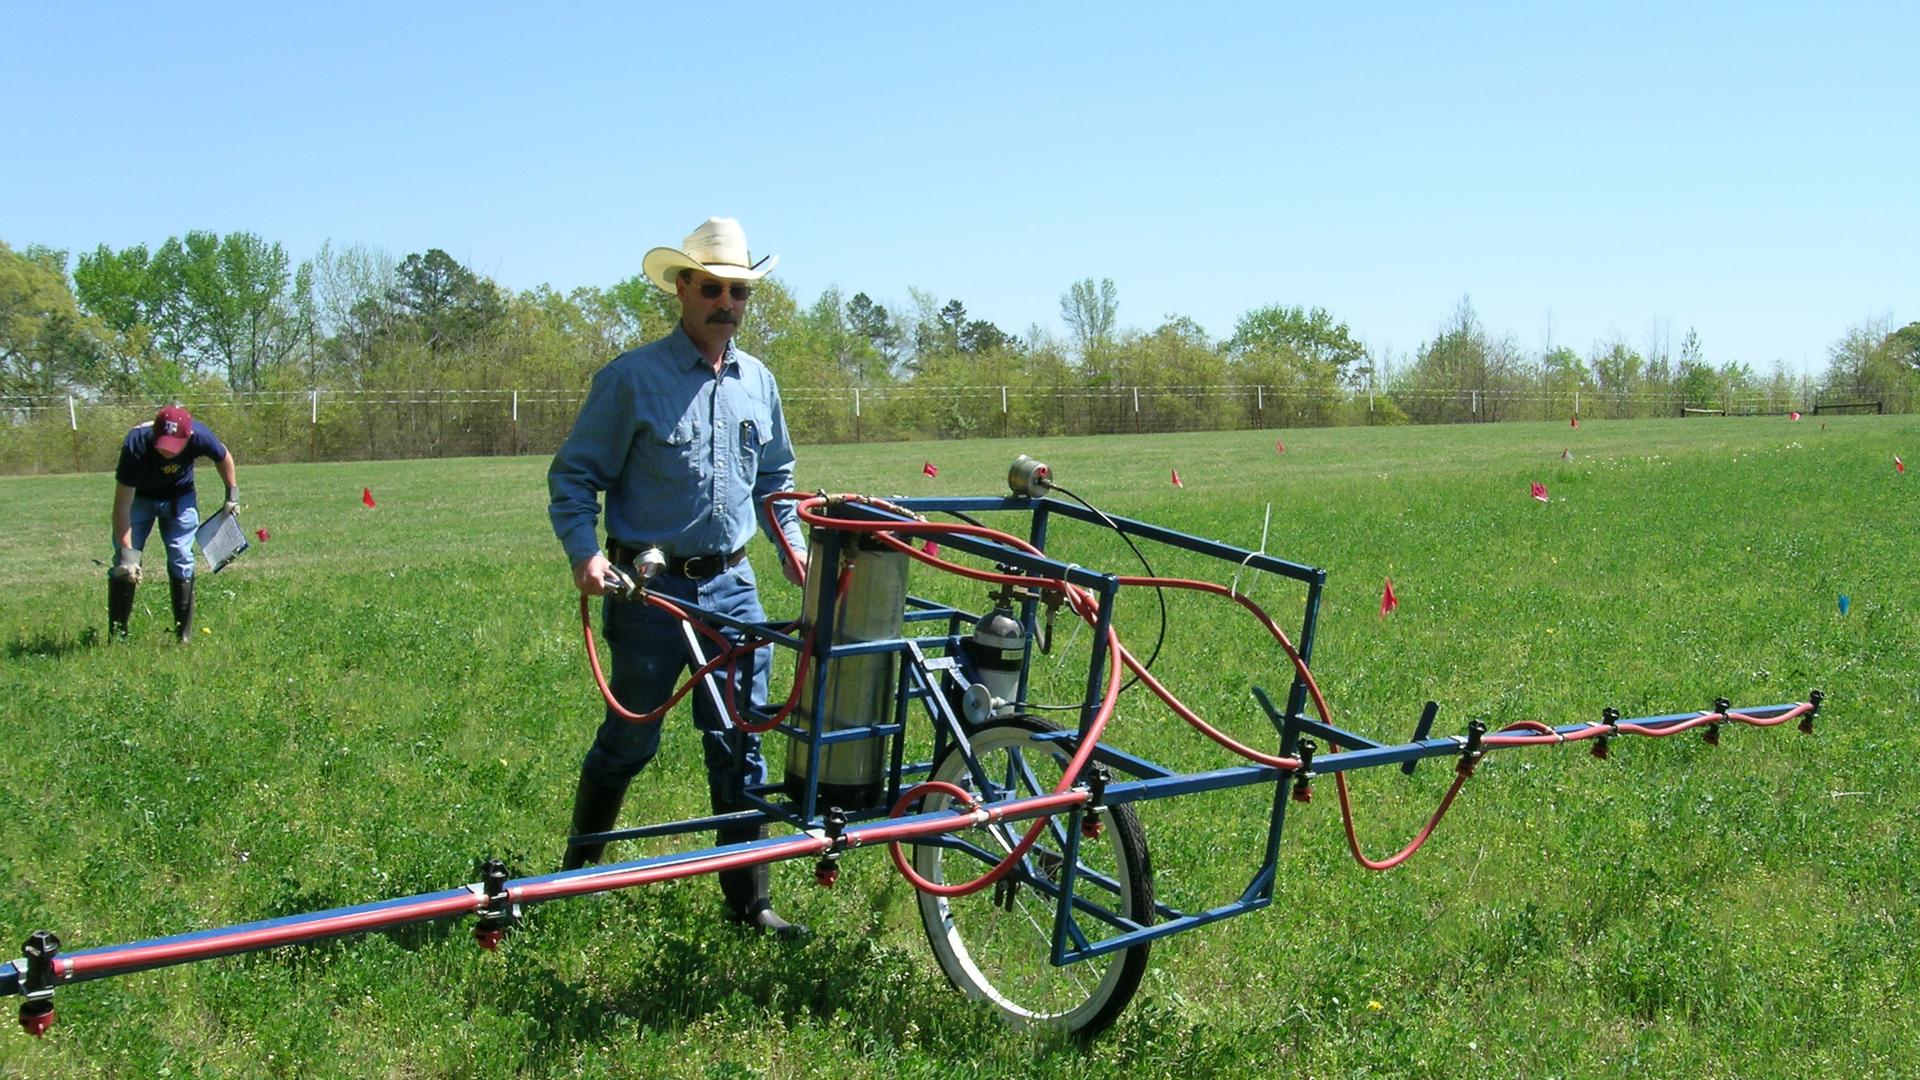 Allen Leonard, research associate with Texas A&M AgriLife Research, uses a custom spray rig to apply herbicide to Roundup Ready alfalfa test plots.